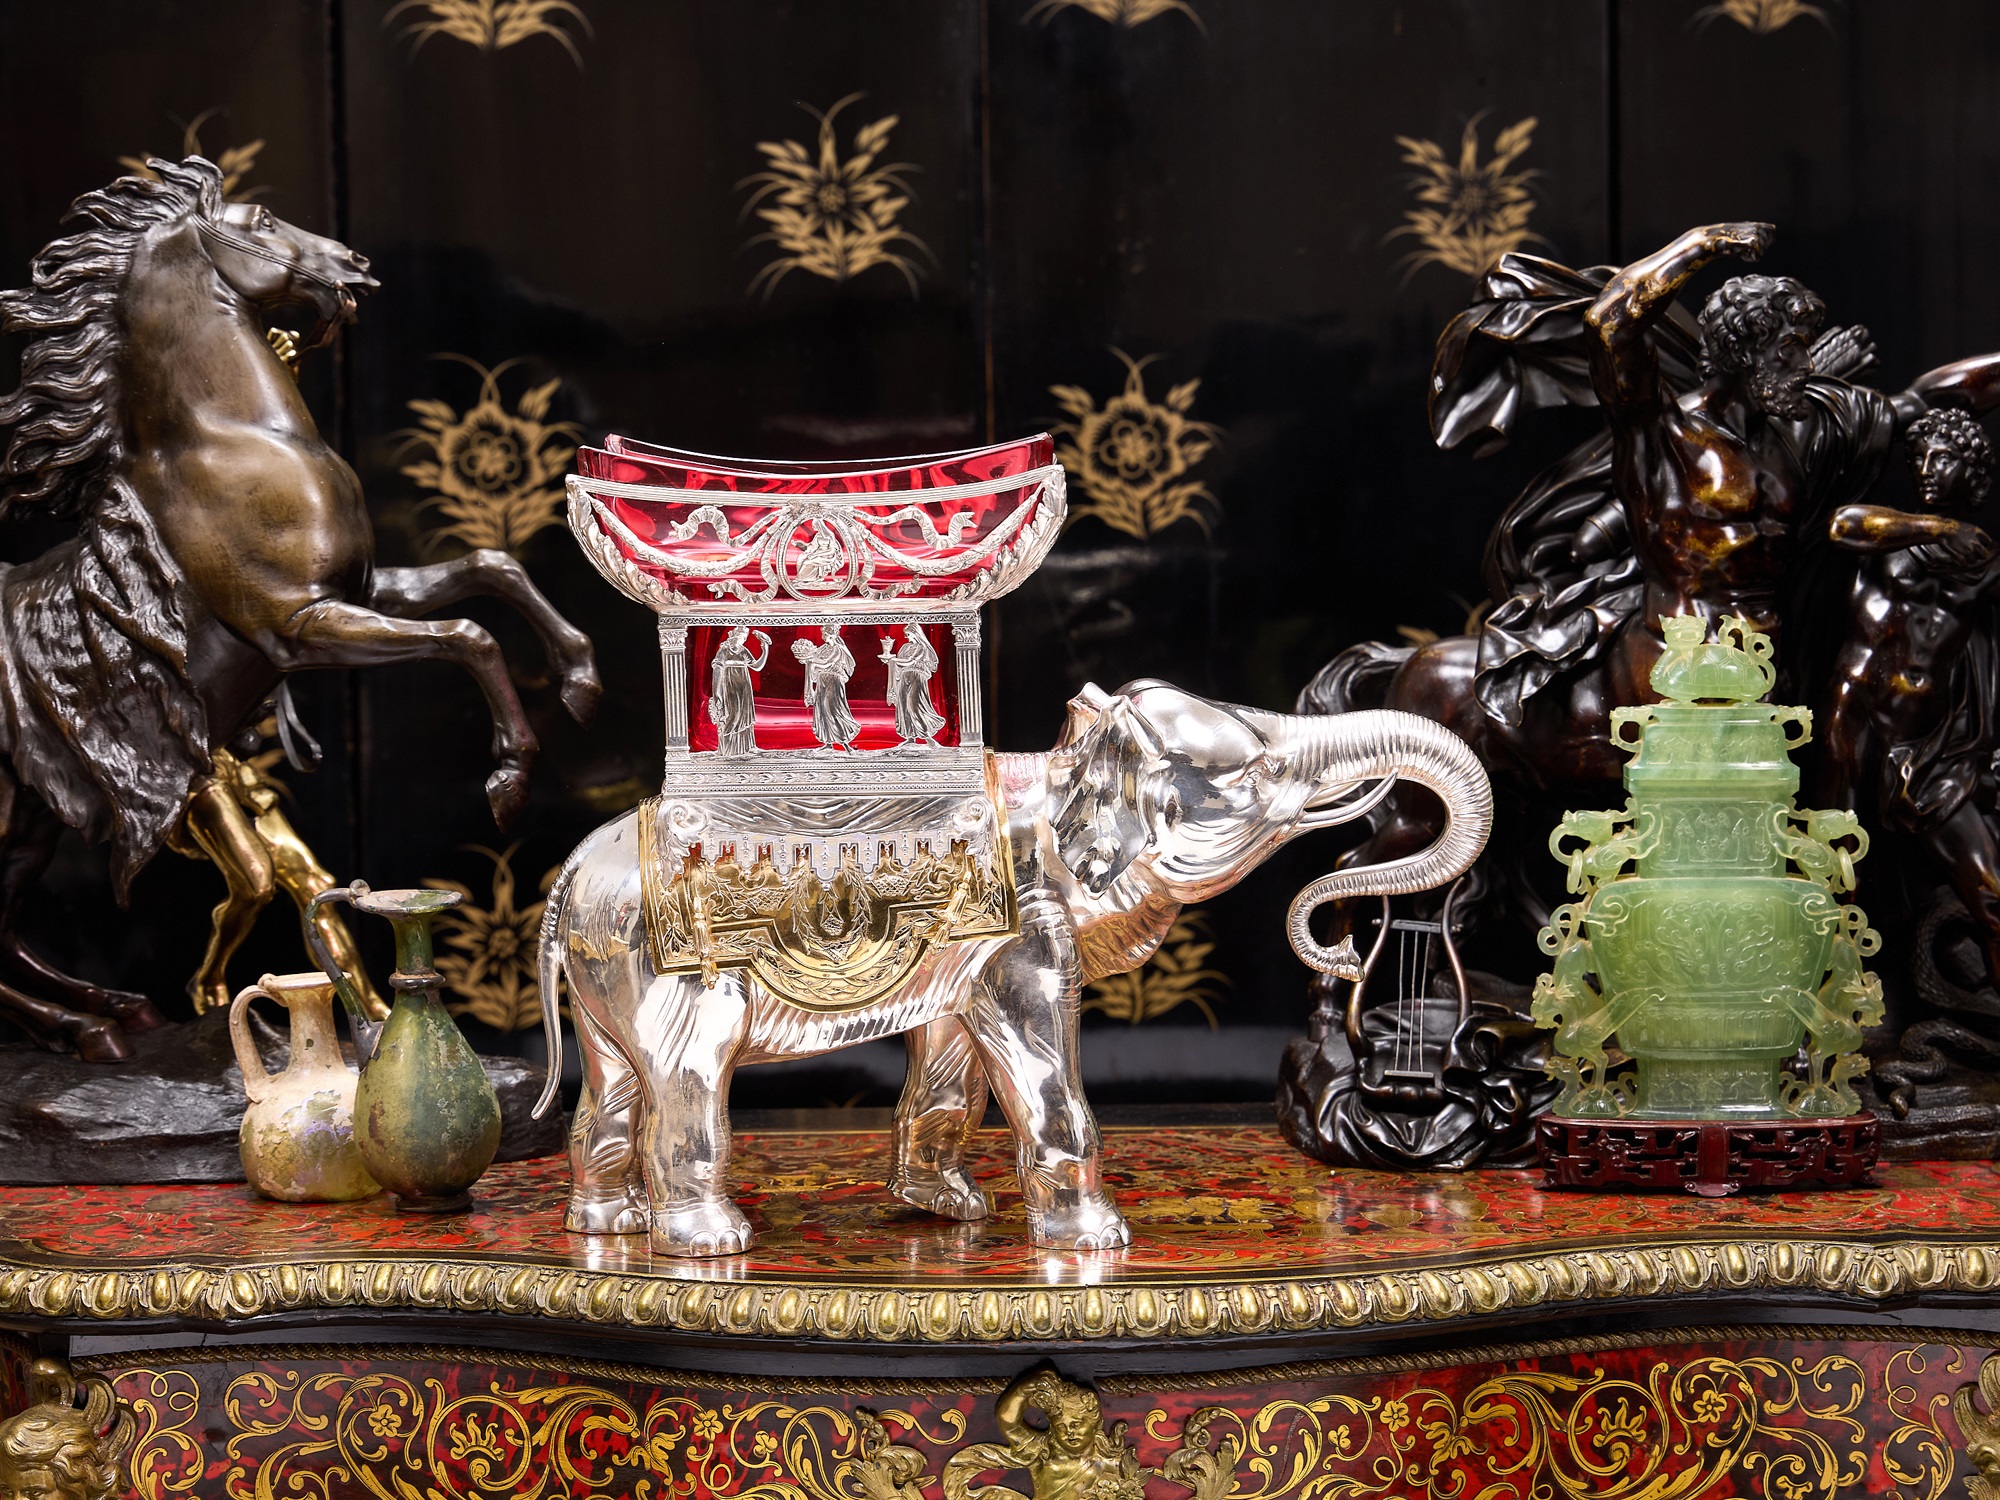 A LARGE SILVER, SILVER GILT AND RUBY GLASS ELEPHANT VASE, GERMAN, 20TH CENTURY